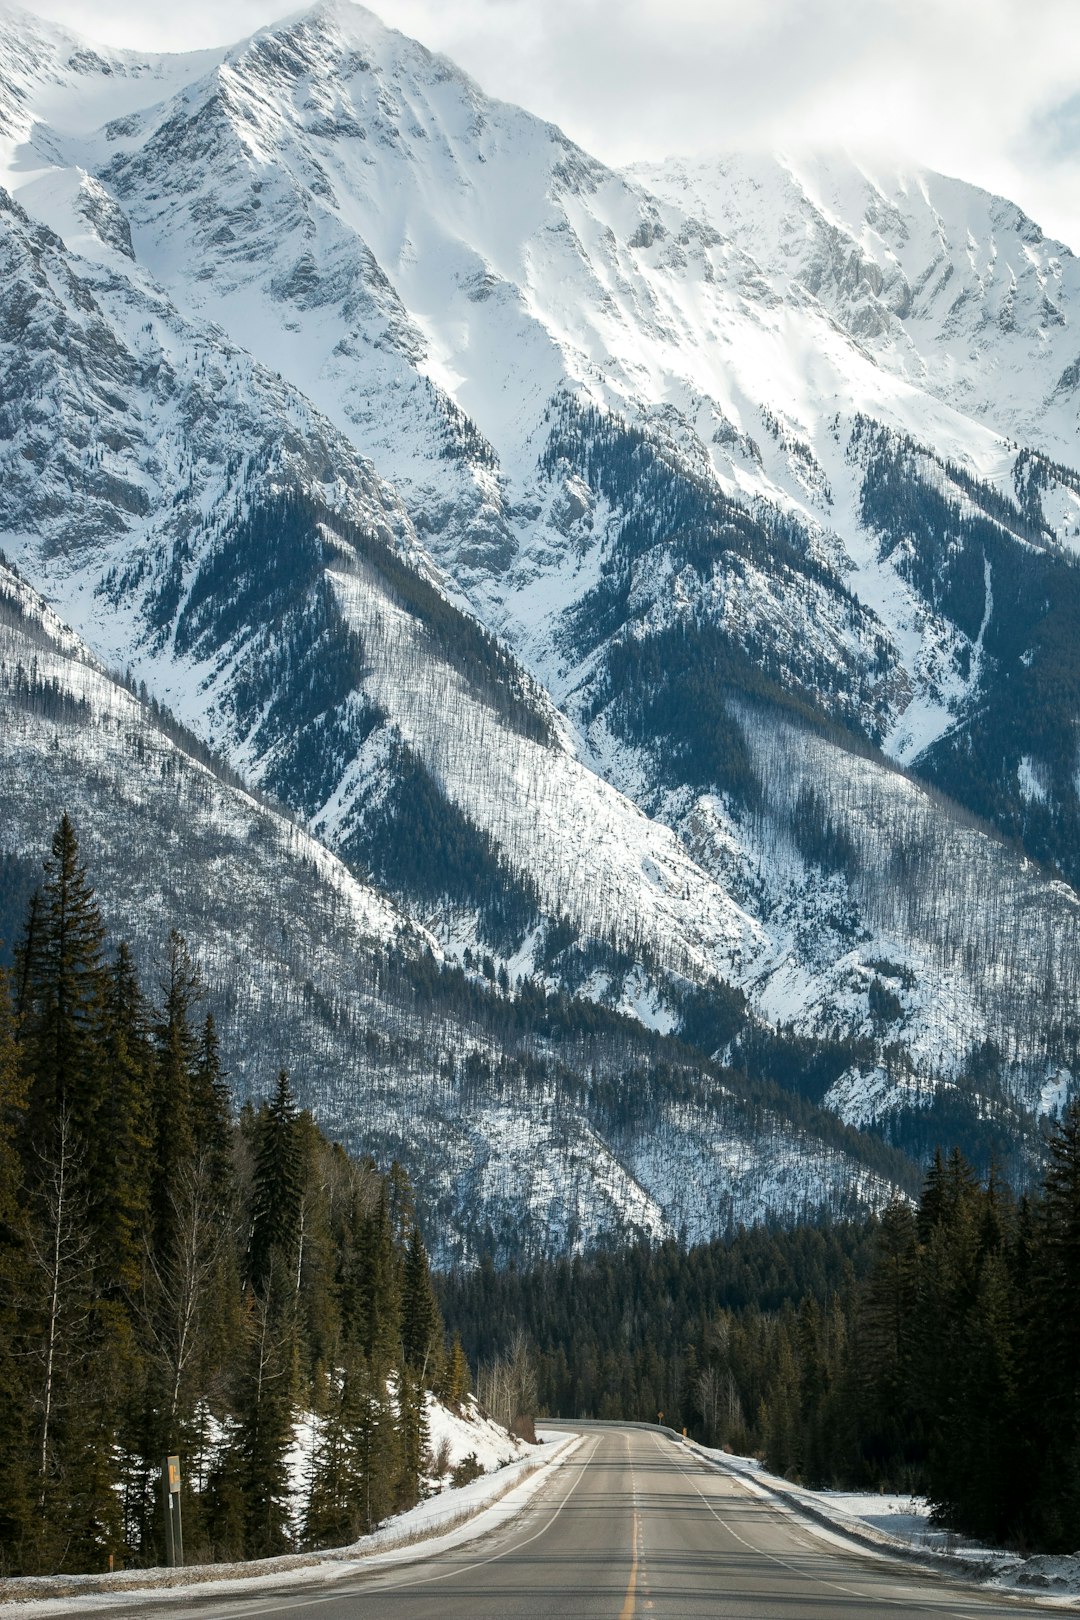 travelers stories about Mountain range in Canadian Rockies, Canada